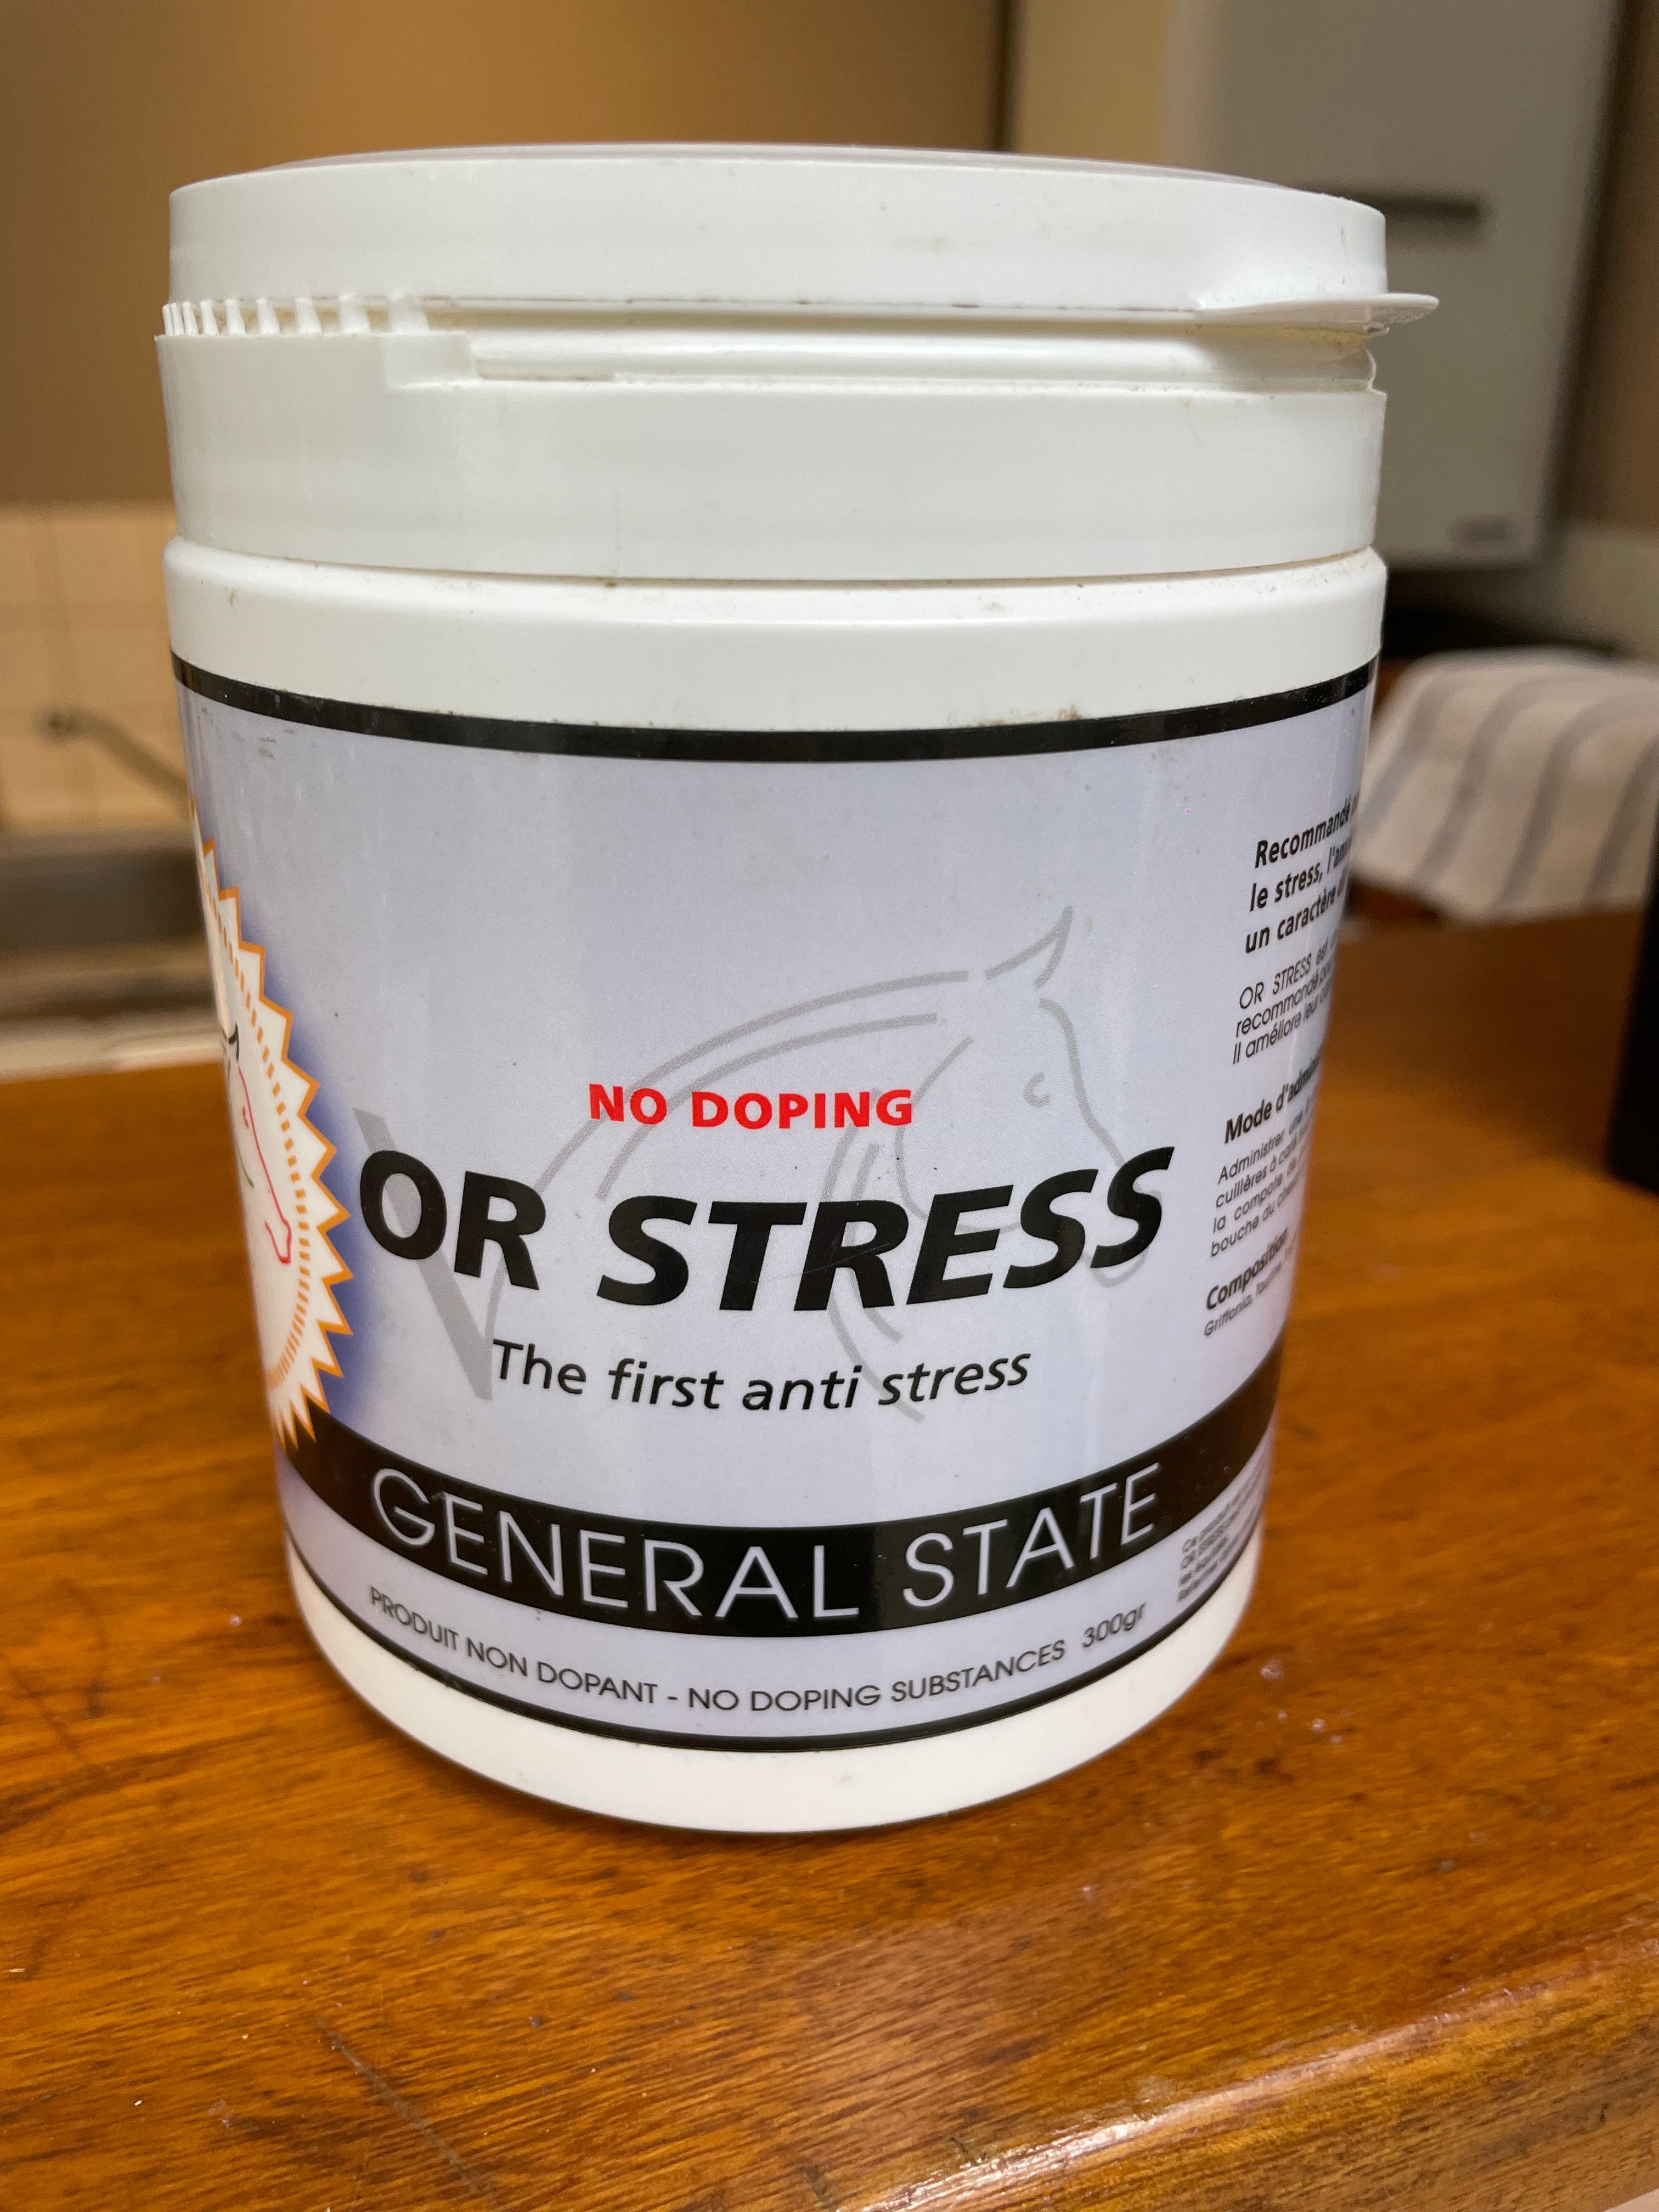 OR STRESS - NO DOPING SUBSTANCES